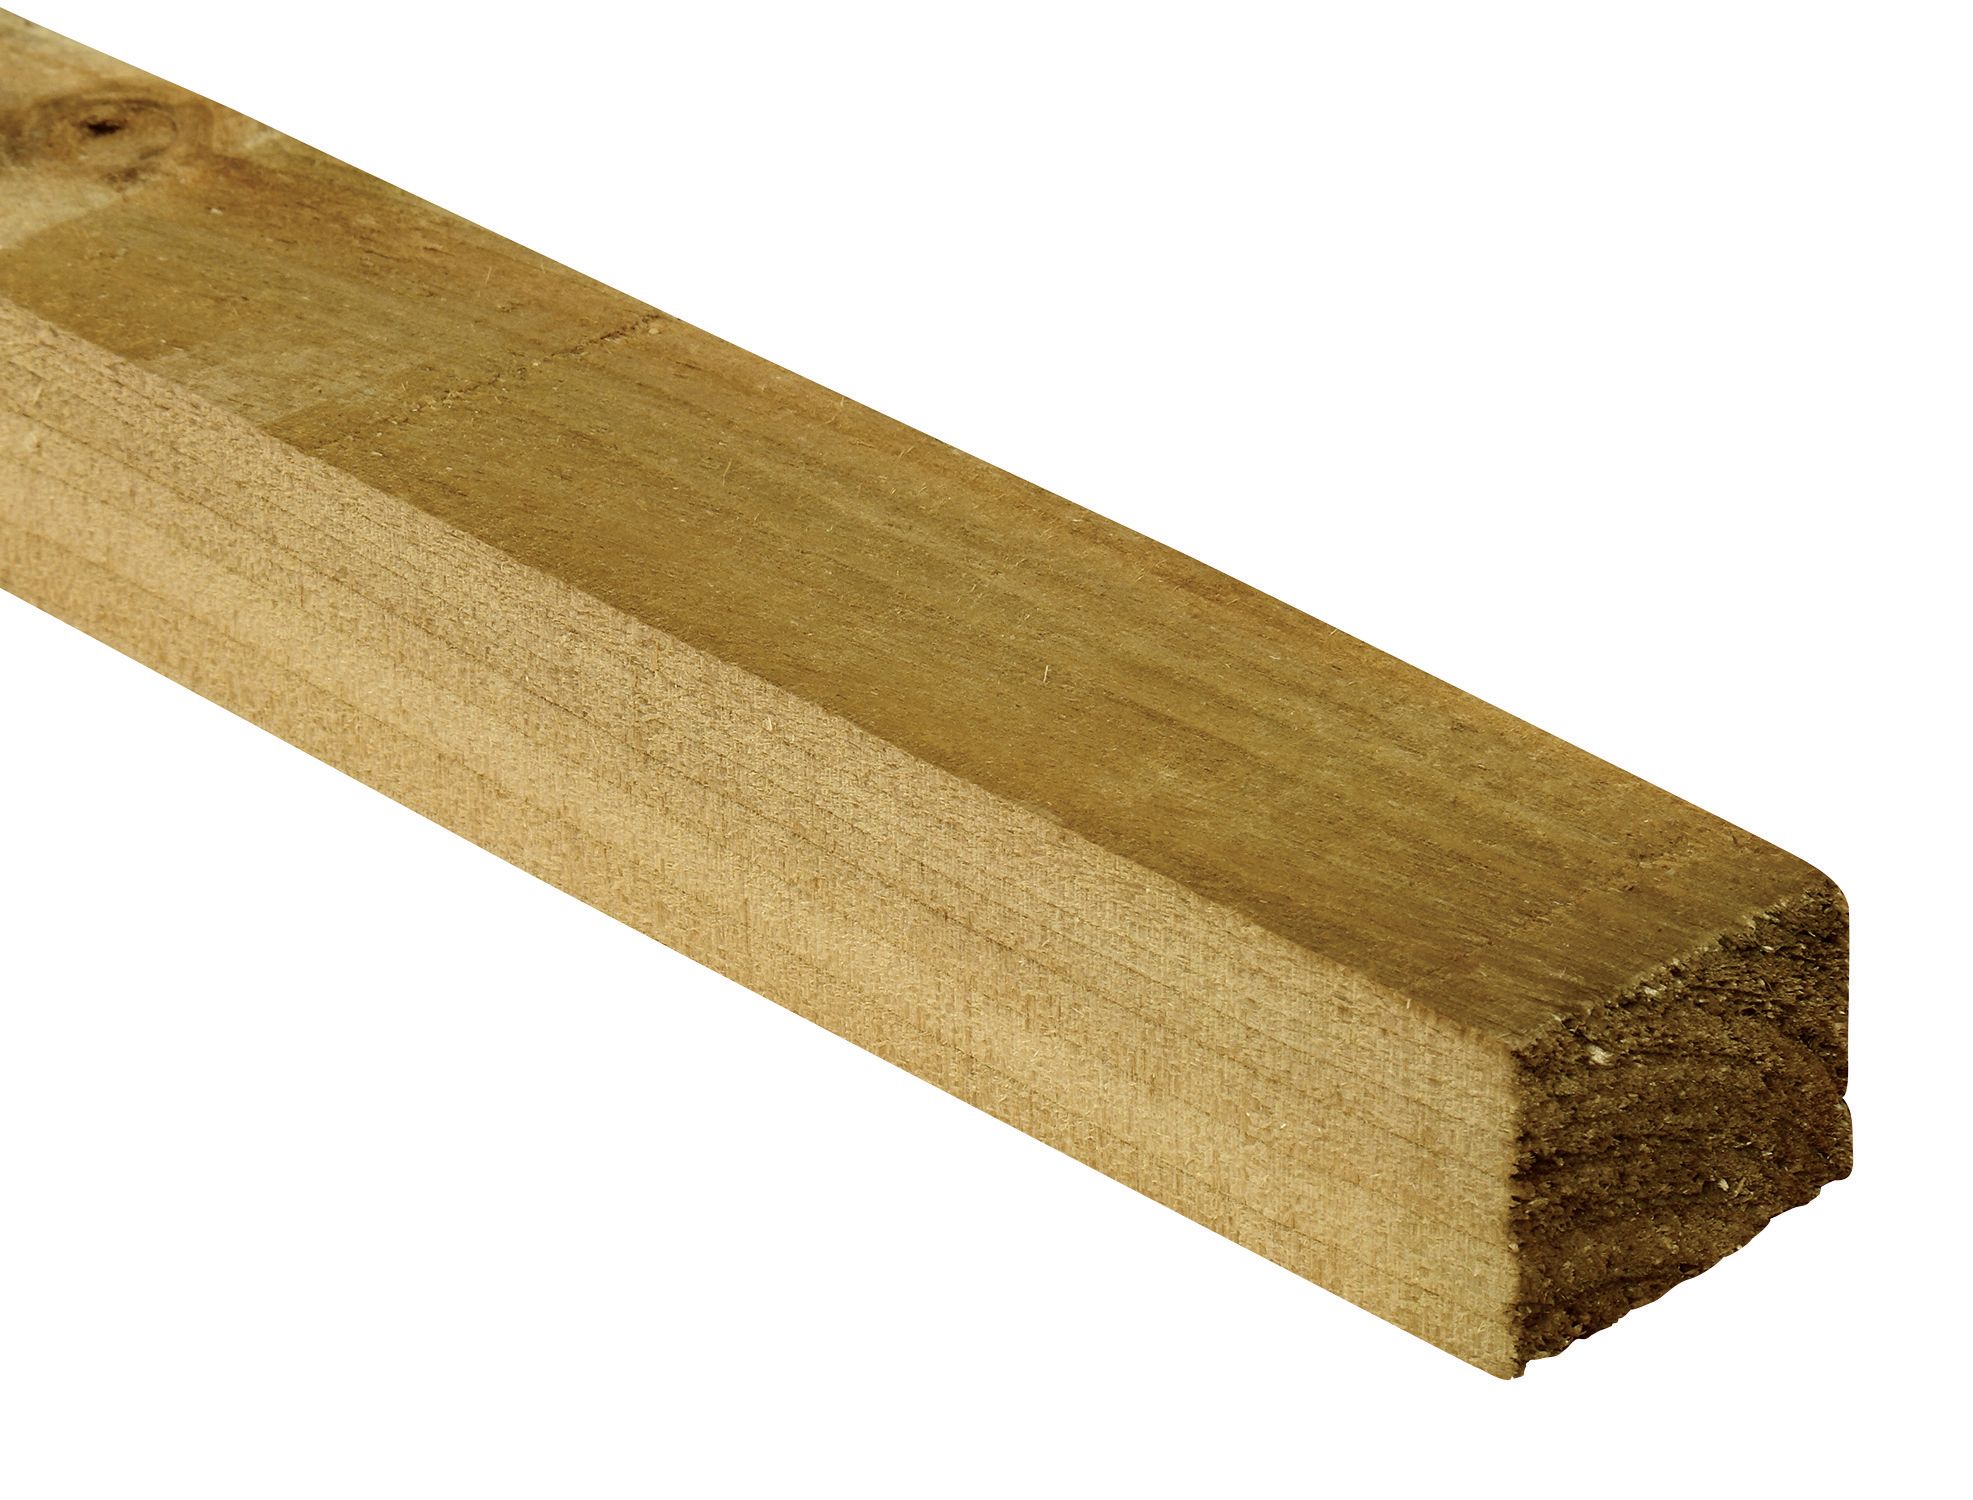 Image of Wickes Treated Sawn Timber - 47 x 47 x 3000mm